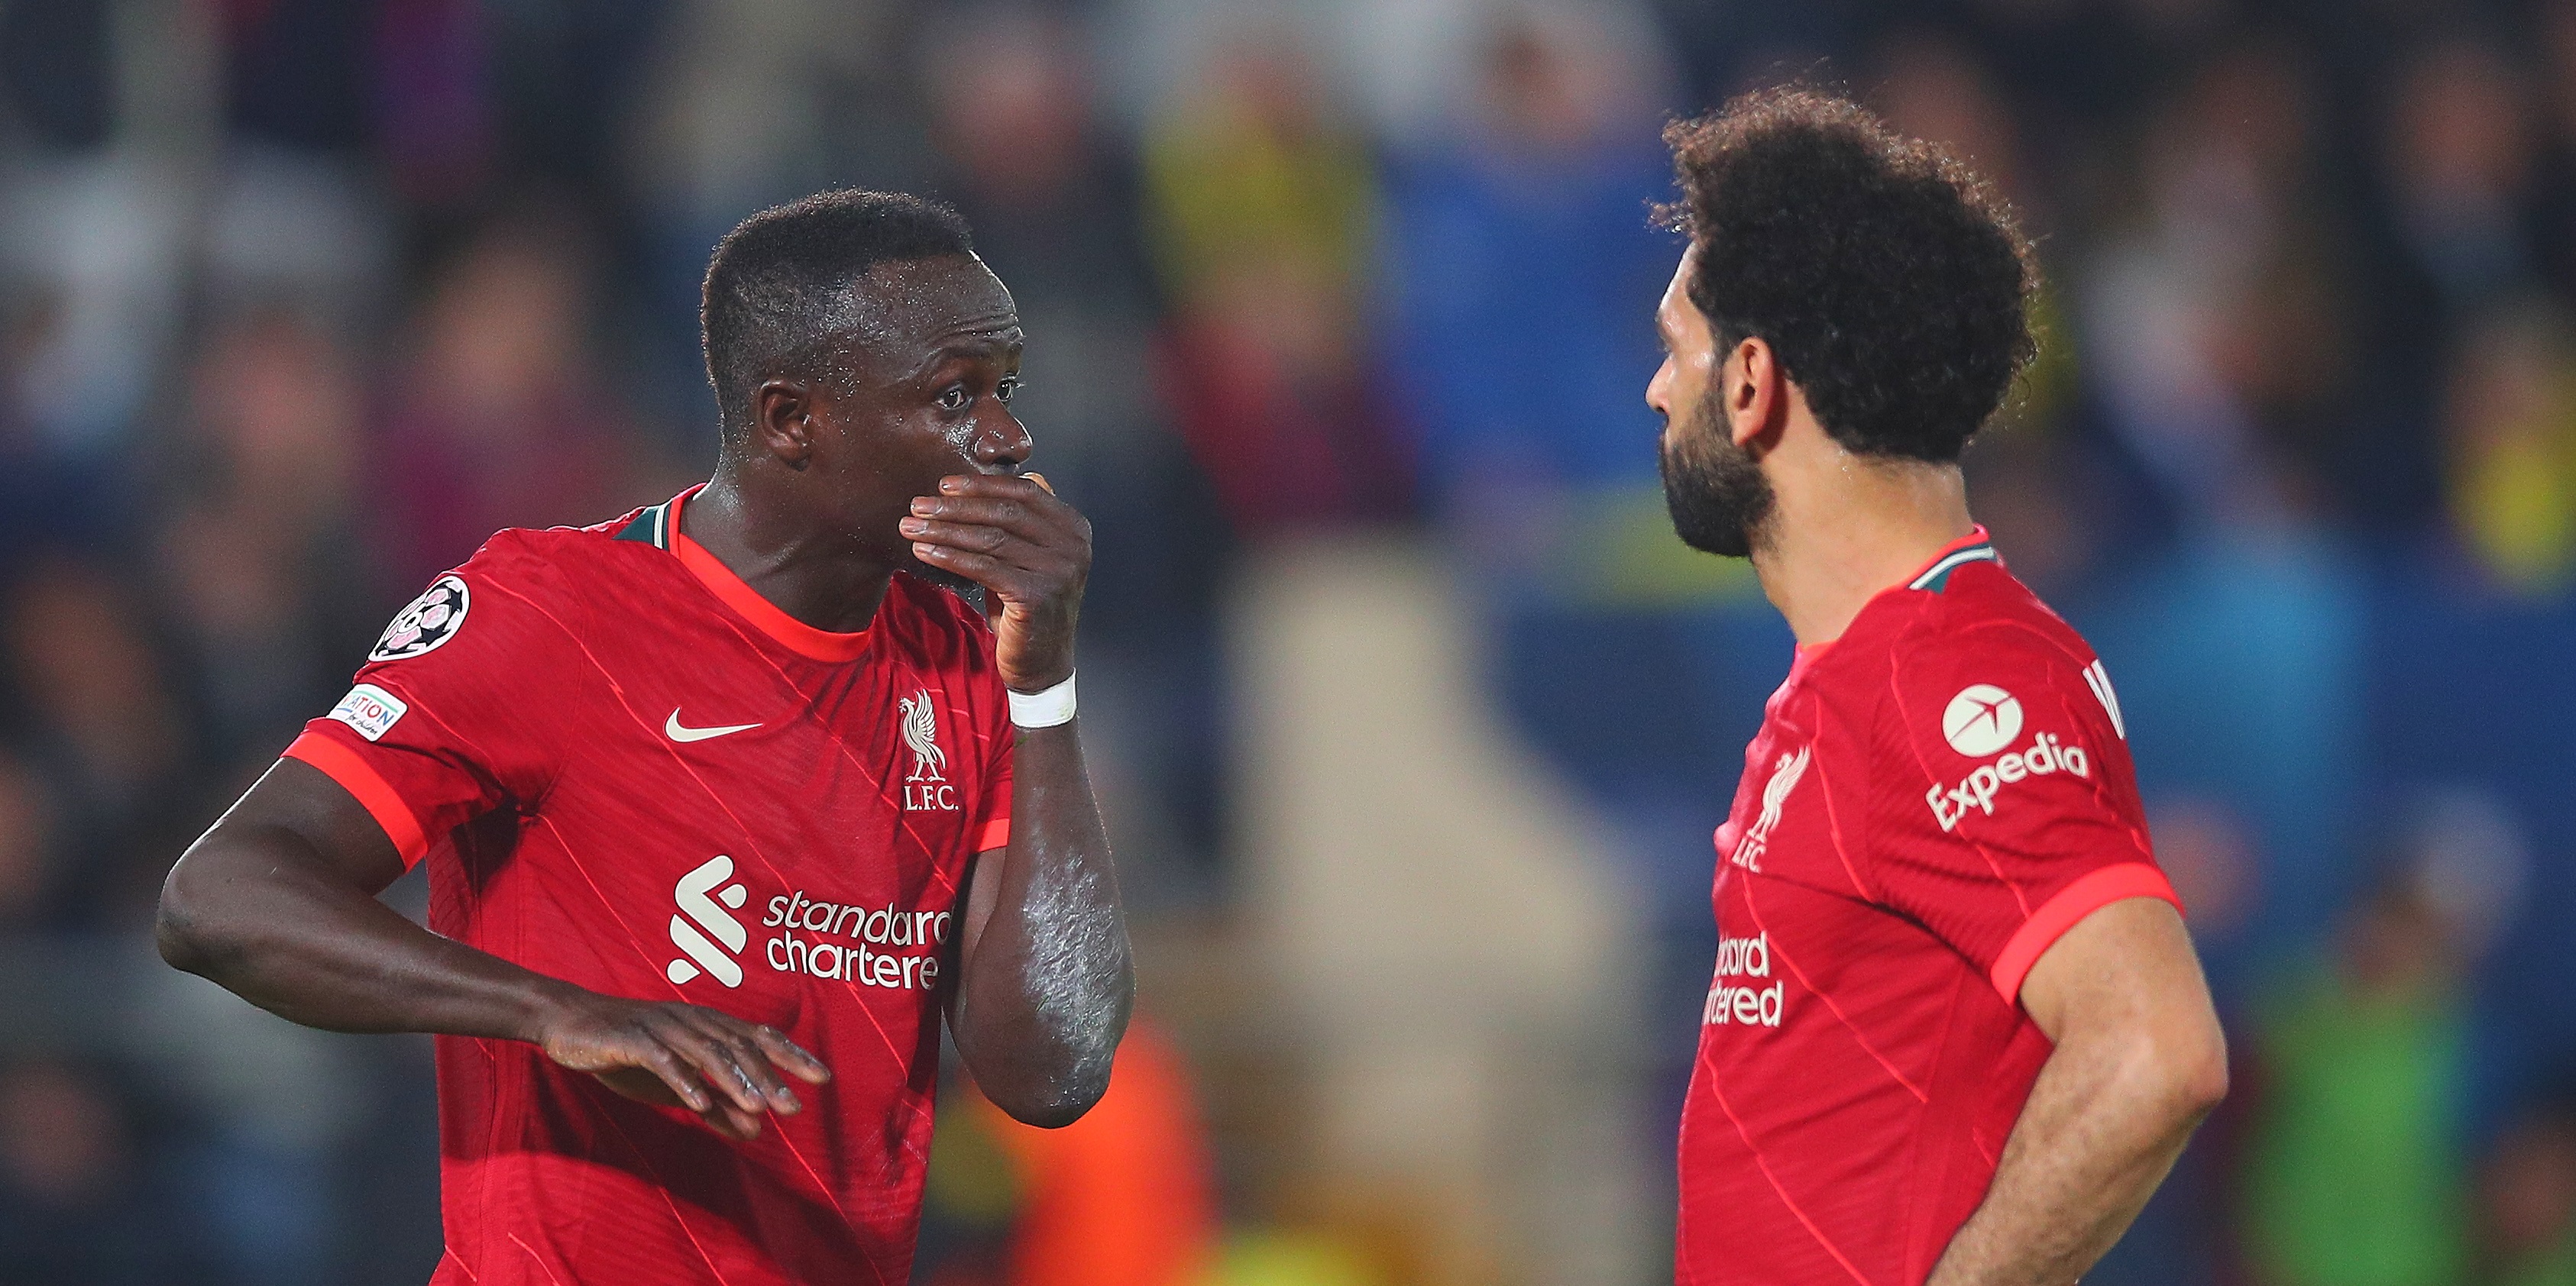 Jose Enrique concerned key Liverpool man is going through ‘the worst moment’ of Reds career at pivotal stage of the season